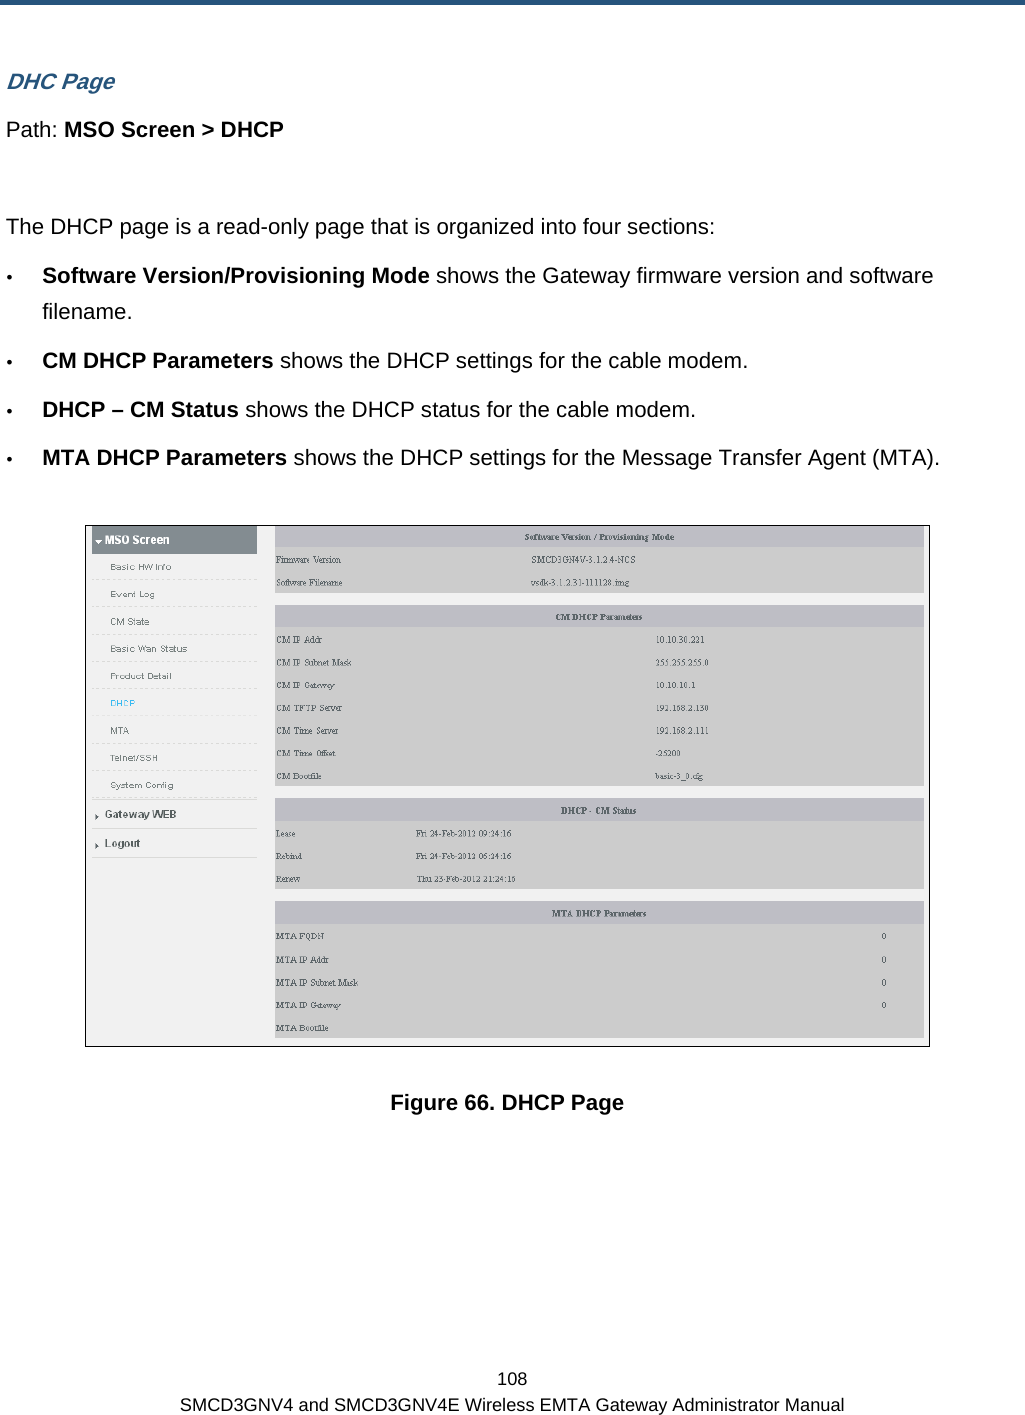  108 SMCD3GNV4 and SMCD3GNV4E Wireless EMTA Gateway Administrator Manual DHC Page Path: MSO Screen &gt; DHCP  The DHCP page is a read-only page that is organized into four sections:   y Software Version/Provisioning Mode shows the Gateway firmware version and software filename. y CM DHCP Parameters shows the DHCP settings for the cable modem. y DHCP – CM Status shows the DHCP status for the cable modem. y MTA DHCP Parameters shows the DHCP settings for the Message Transfer Agent (MTA).  Figure 66. DHCP Page 